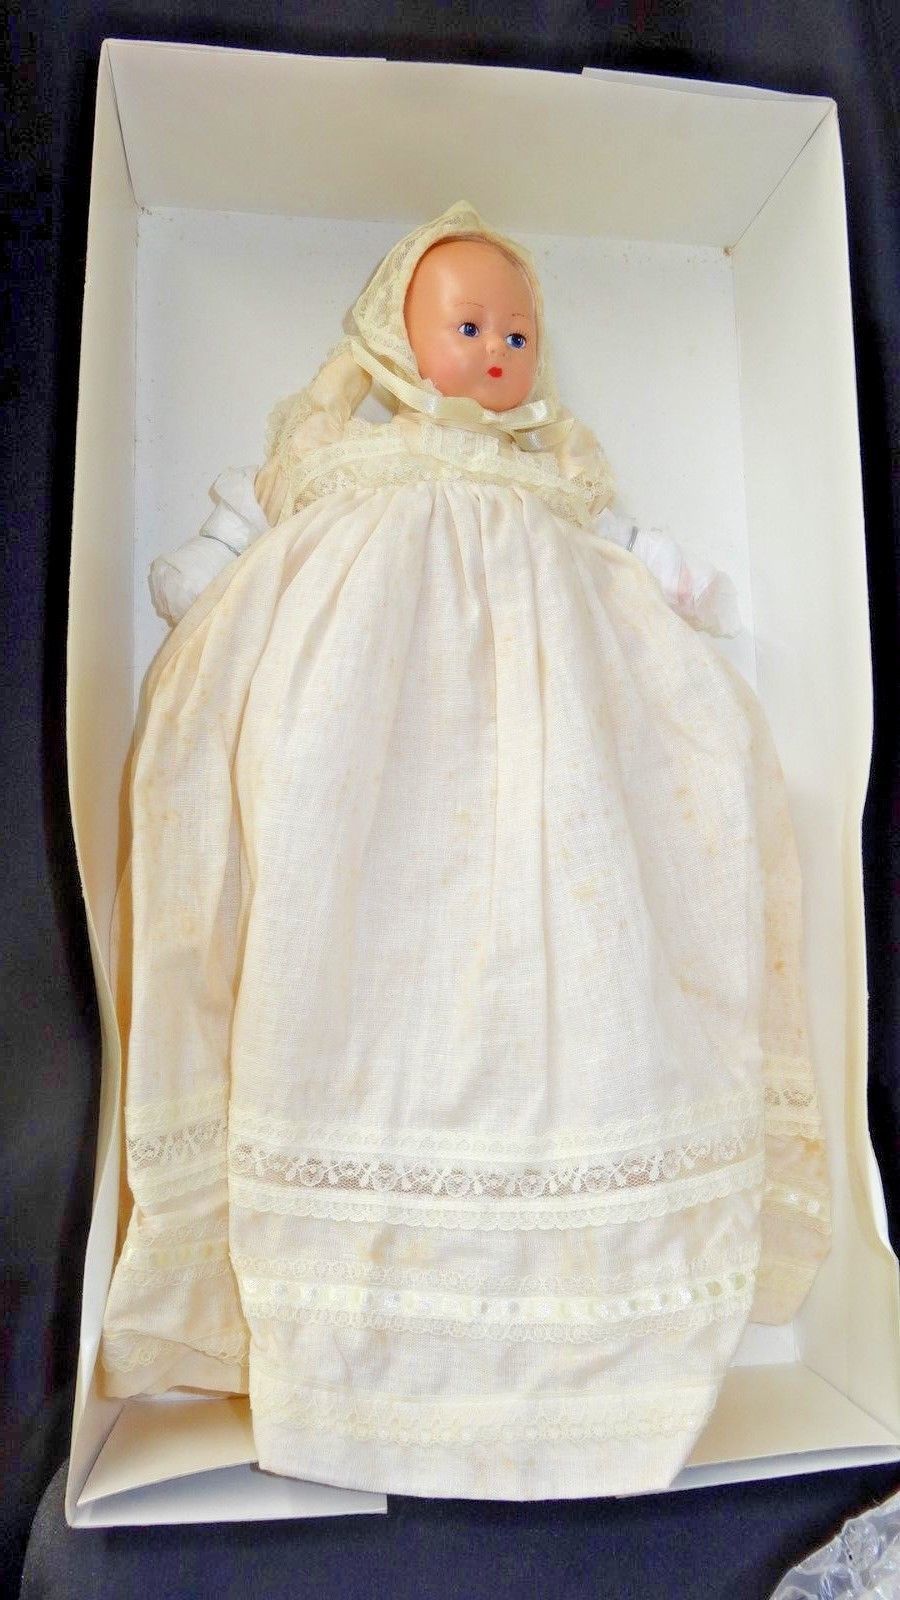 Vintage Horsman Tynie Baby Doll Original Box Limited Numbered Edition - $75.00